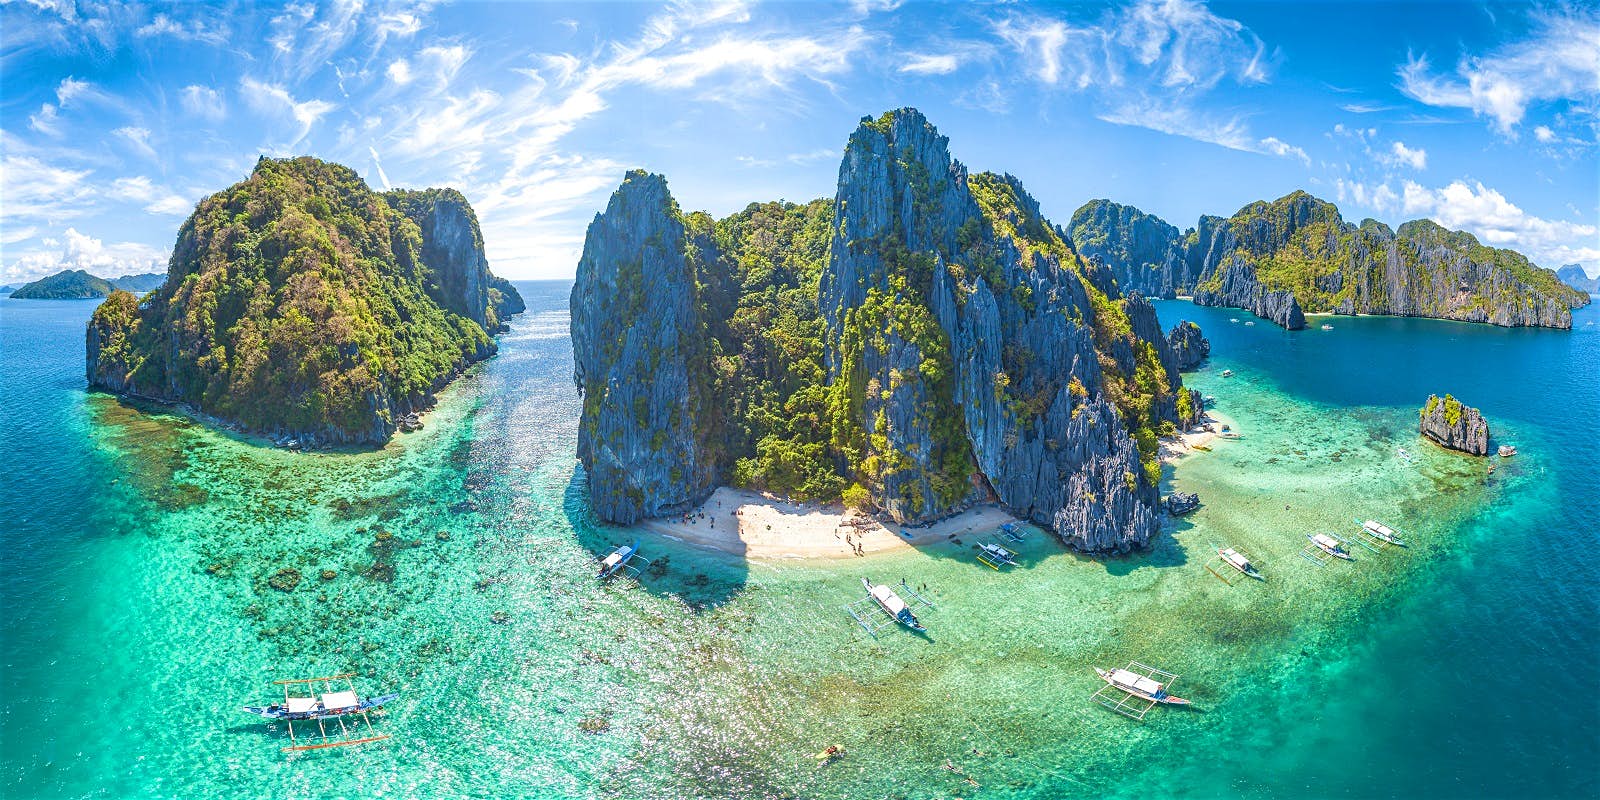 Are You One of the 10% Who Can Get at Least 18 on This 24-Question Geography Quiz? Philippines islands